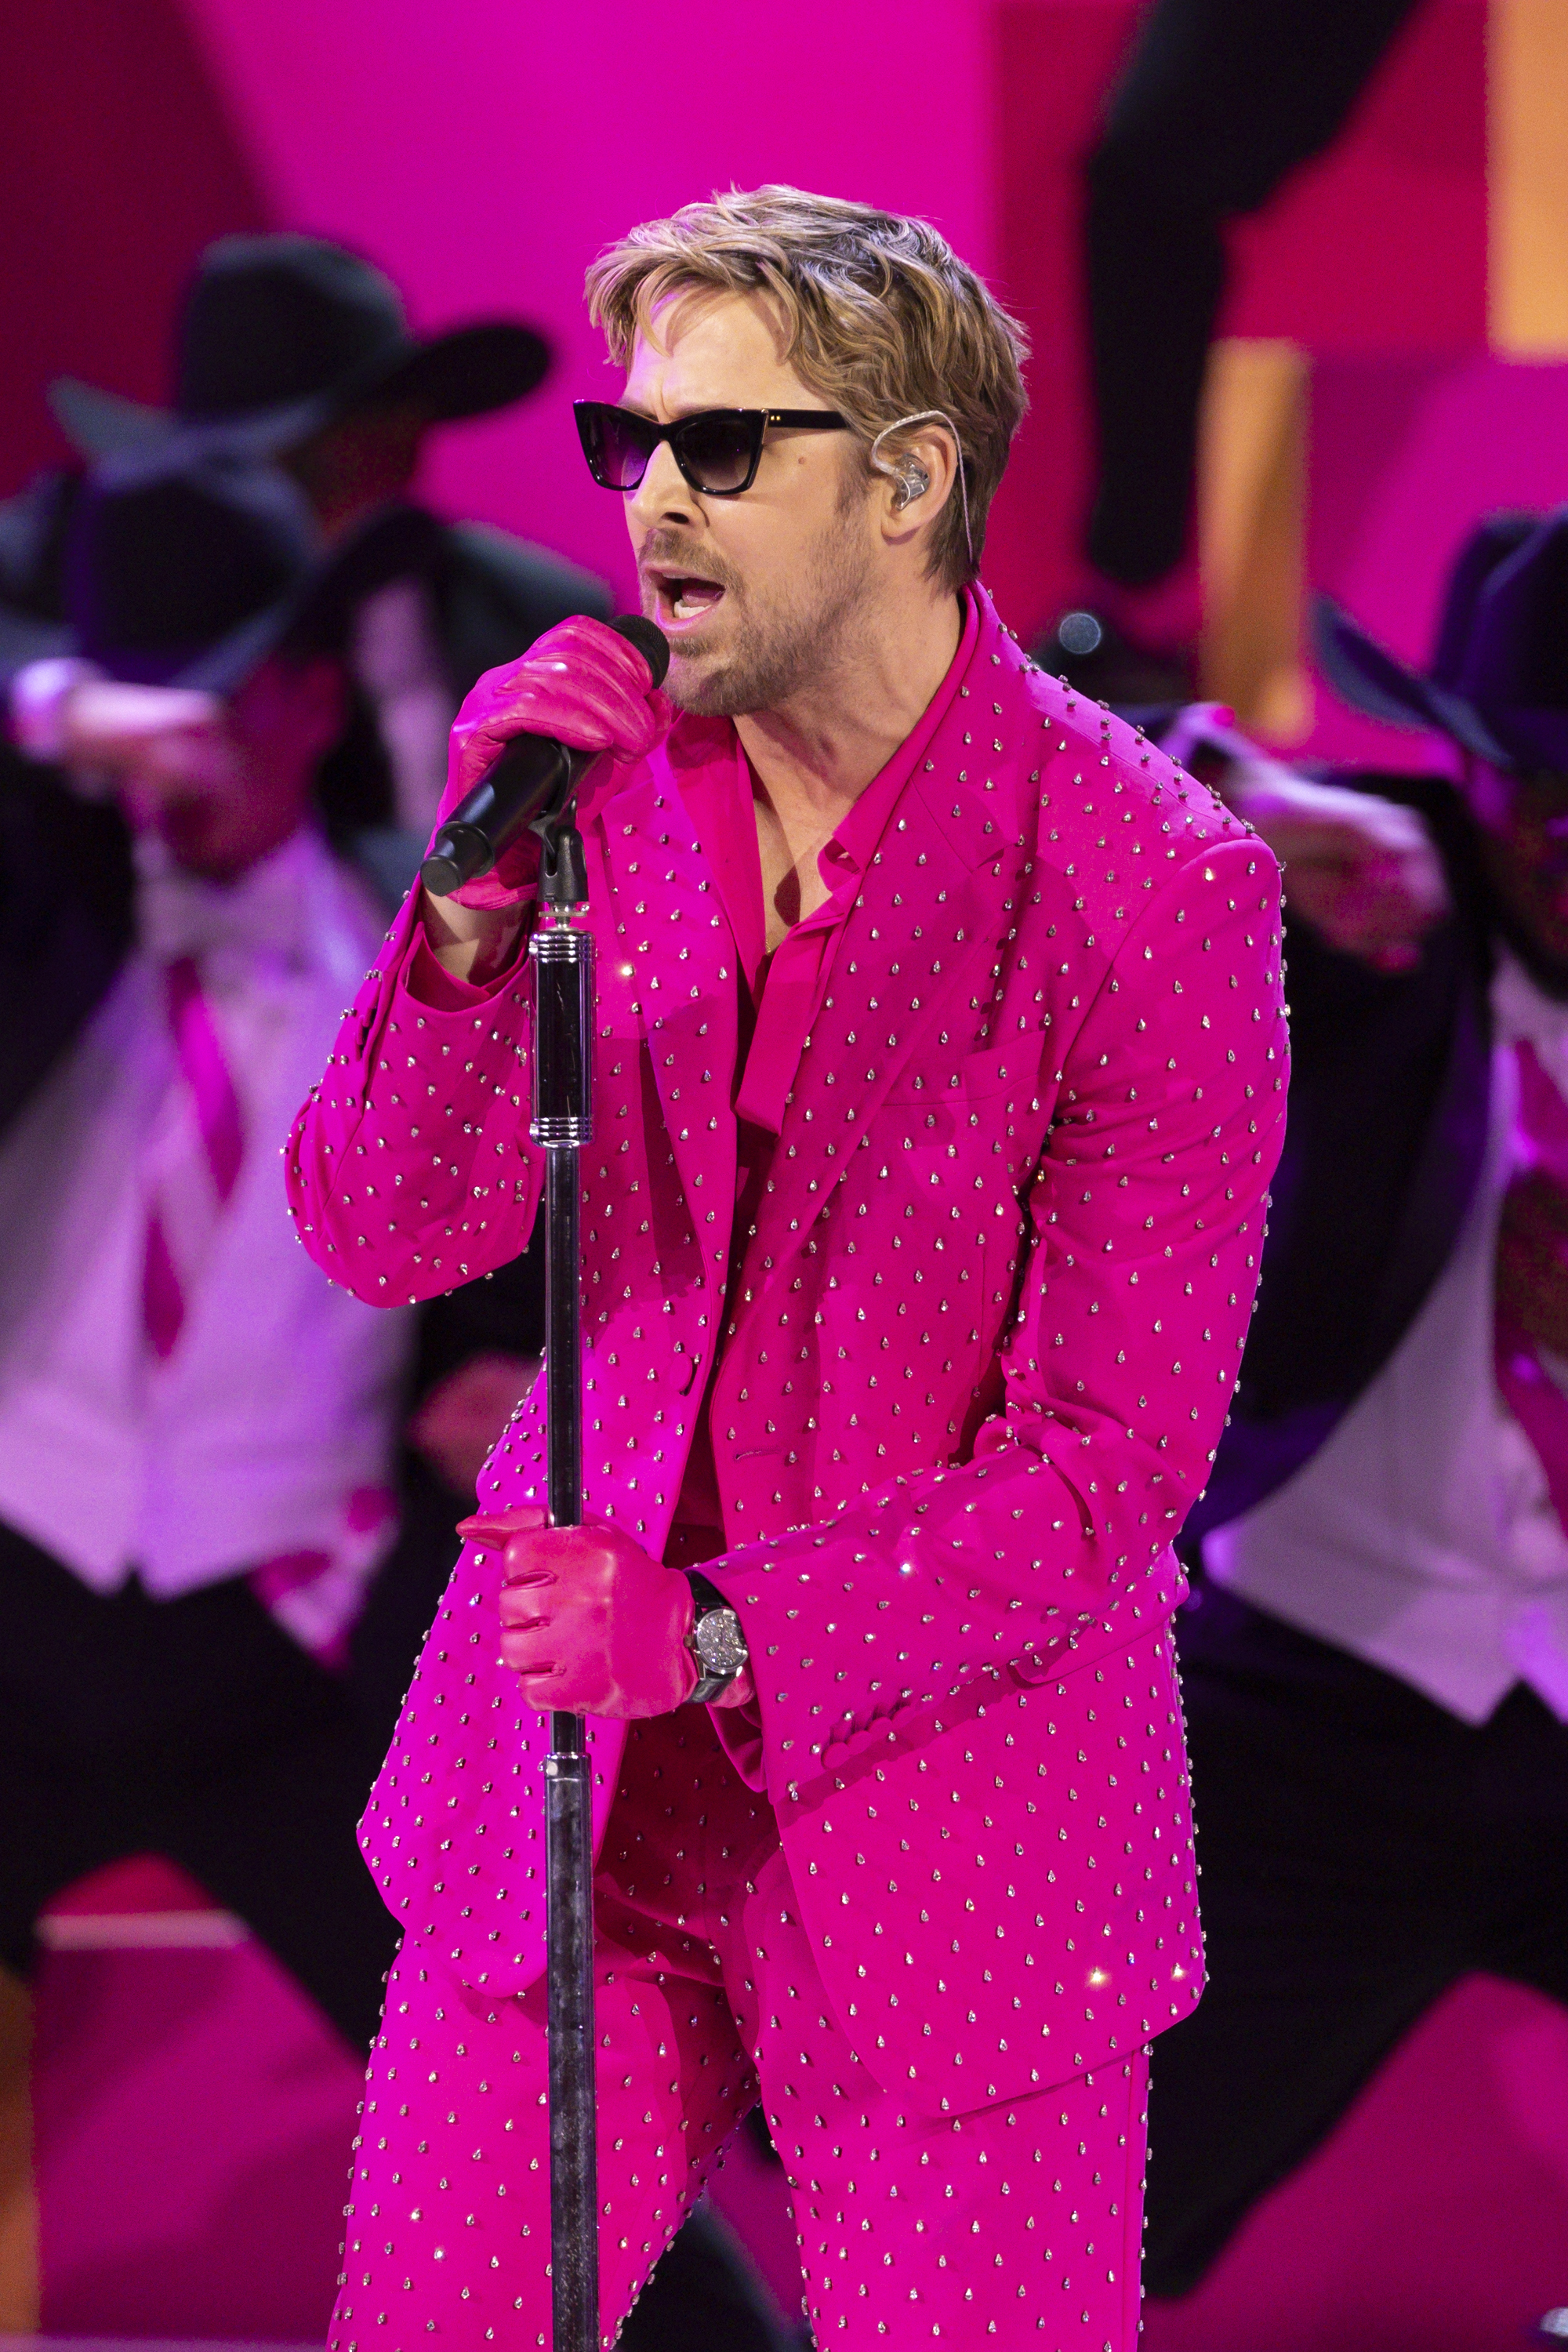 Ryan Gosling in a pink dotted suit singing into a microphone on stage